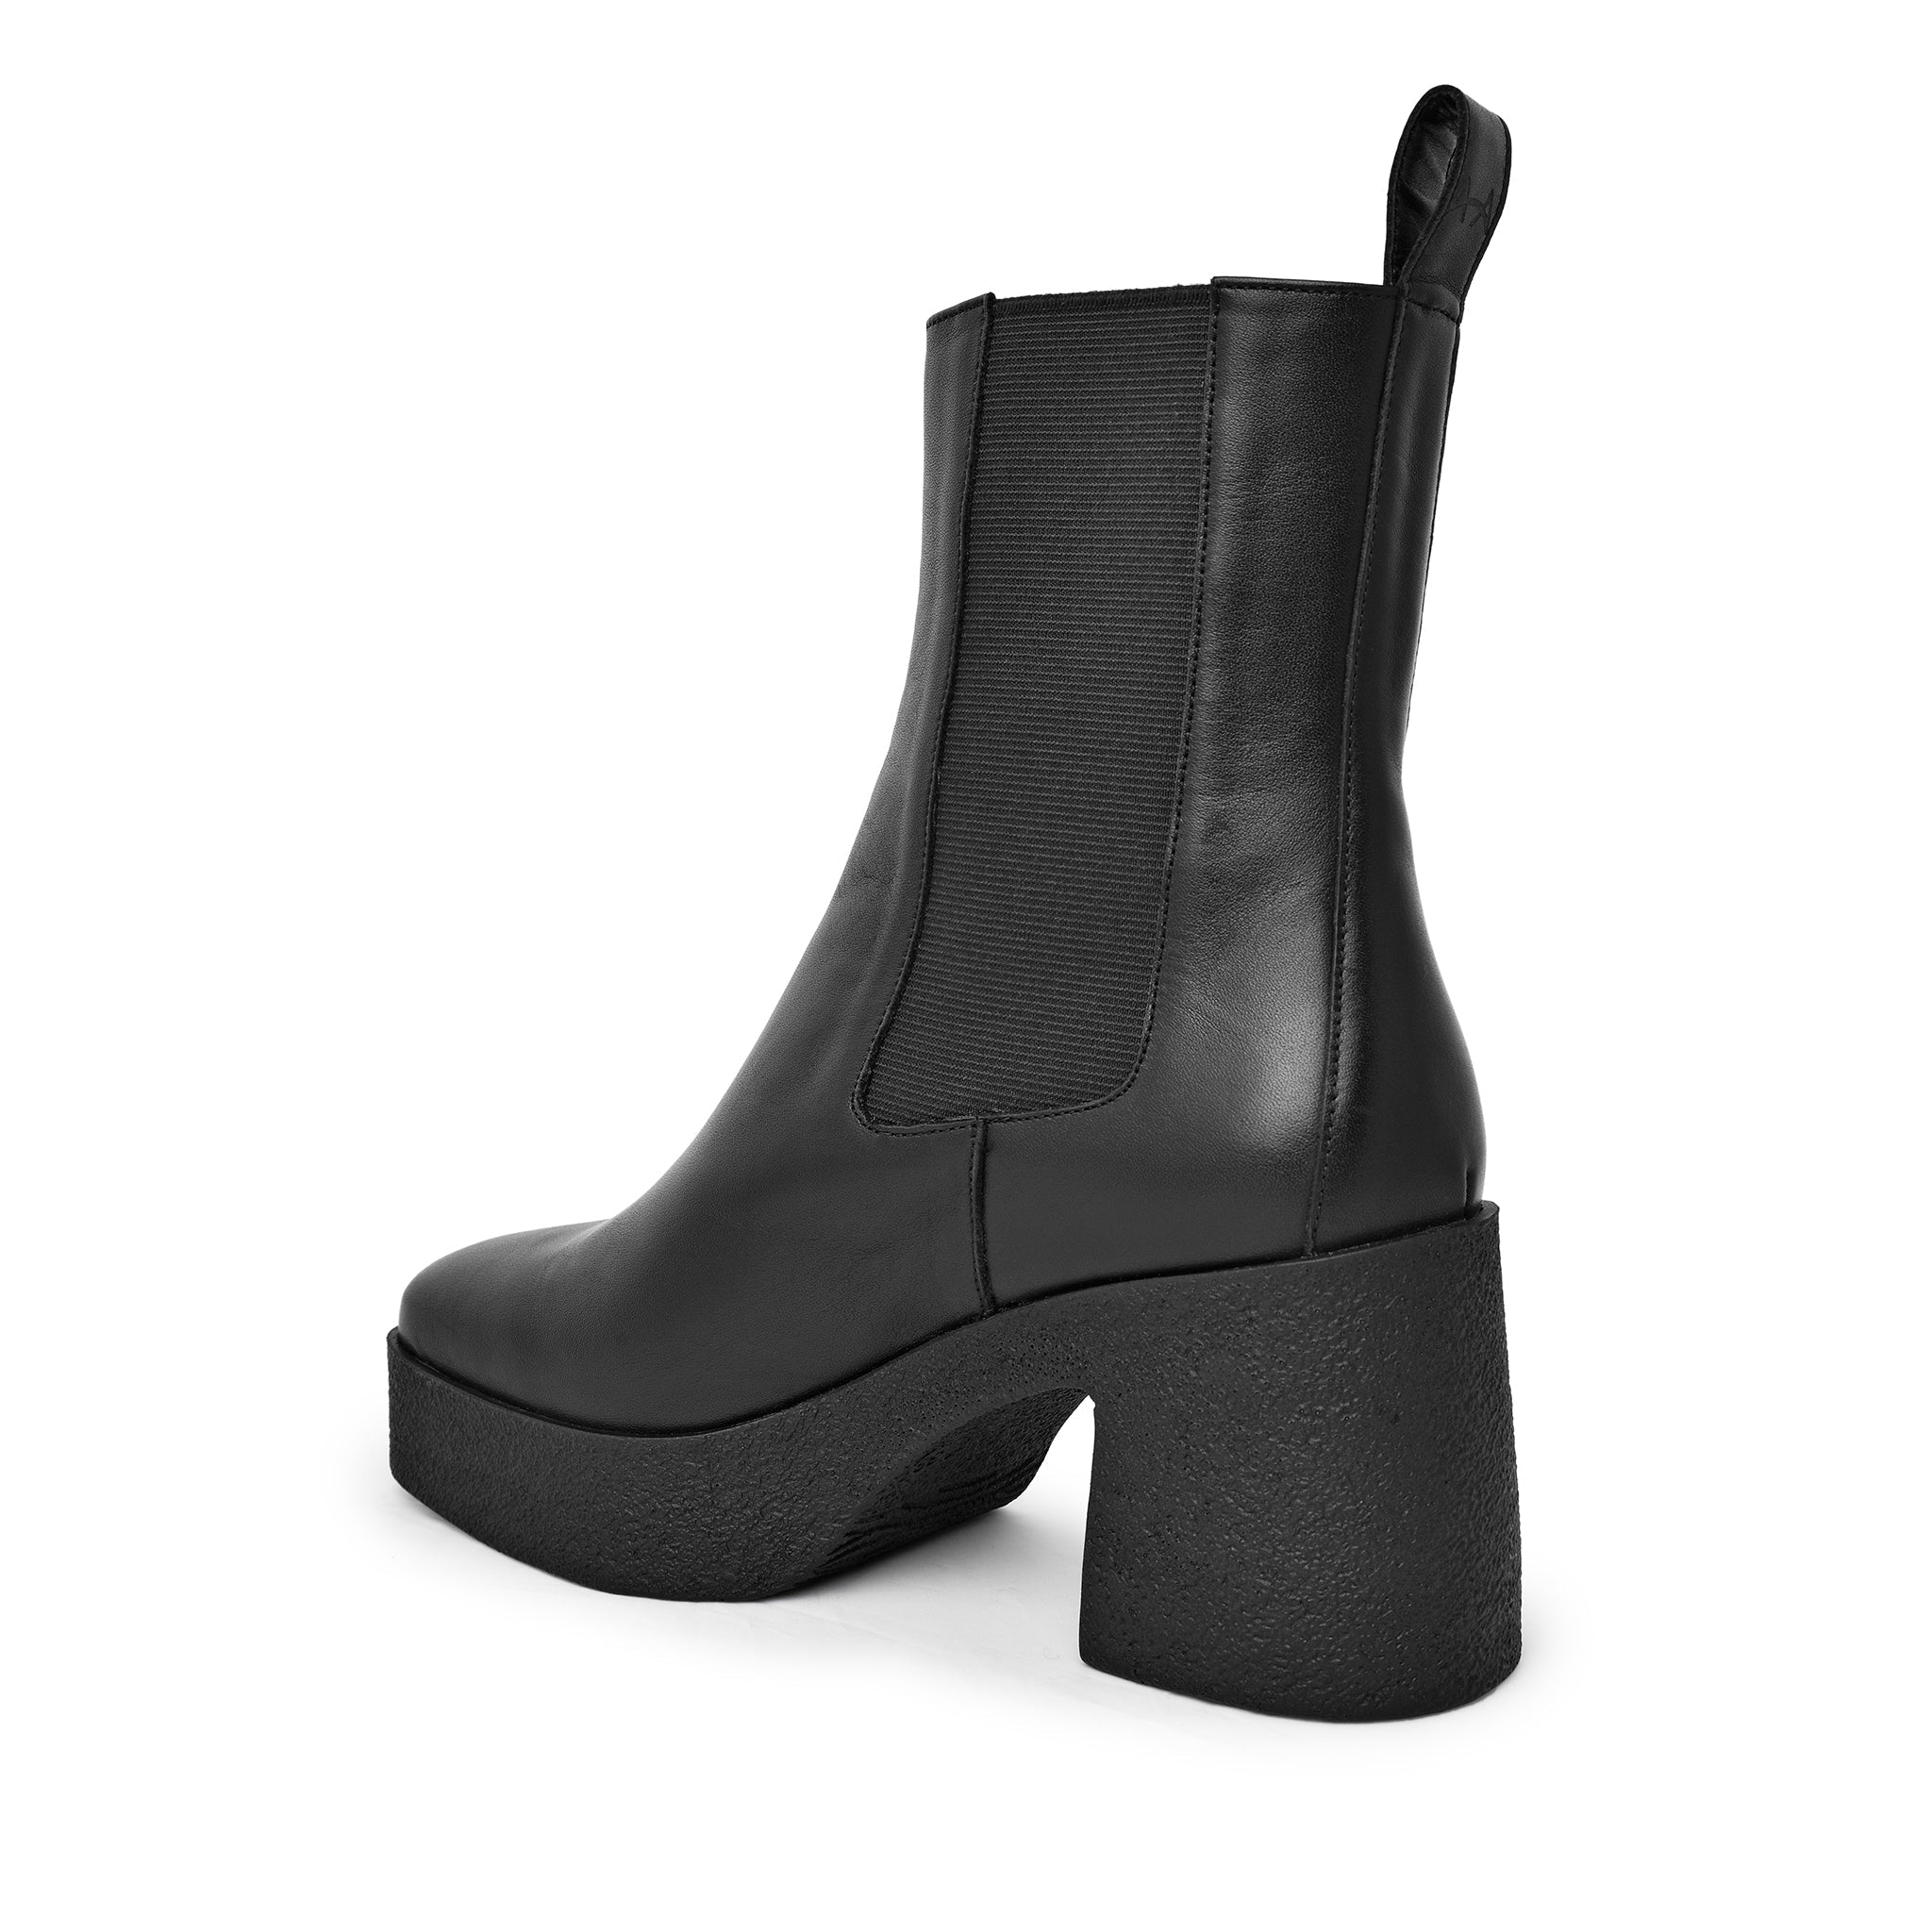 Momo Black Leather Chelsea Boots 20077-04-01 - 11